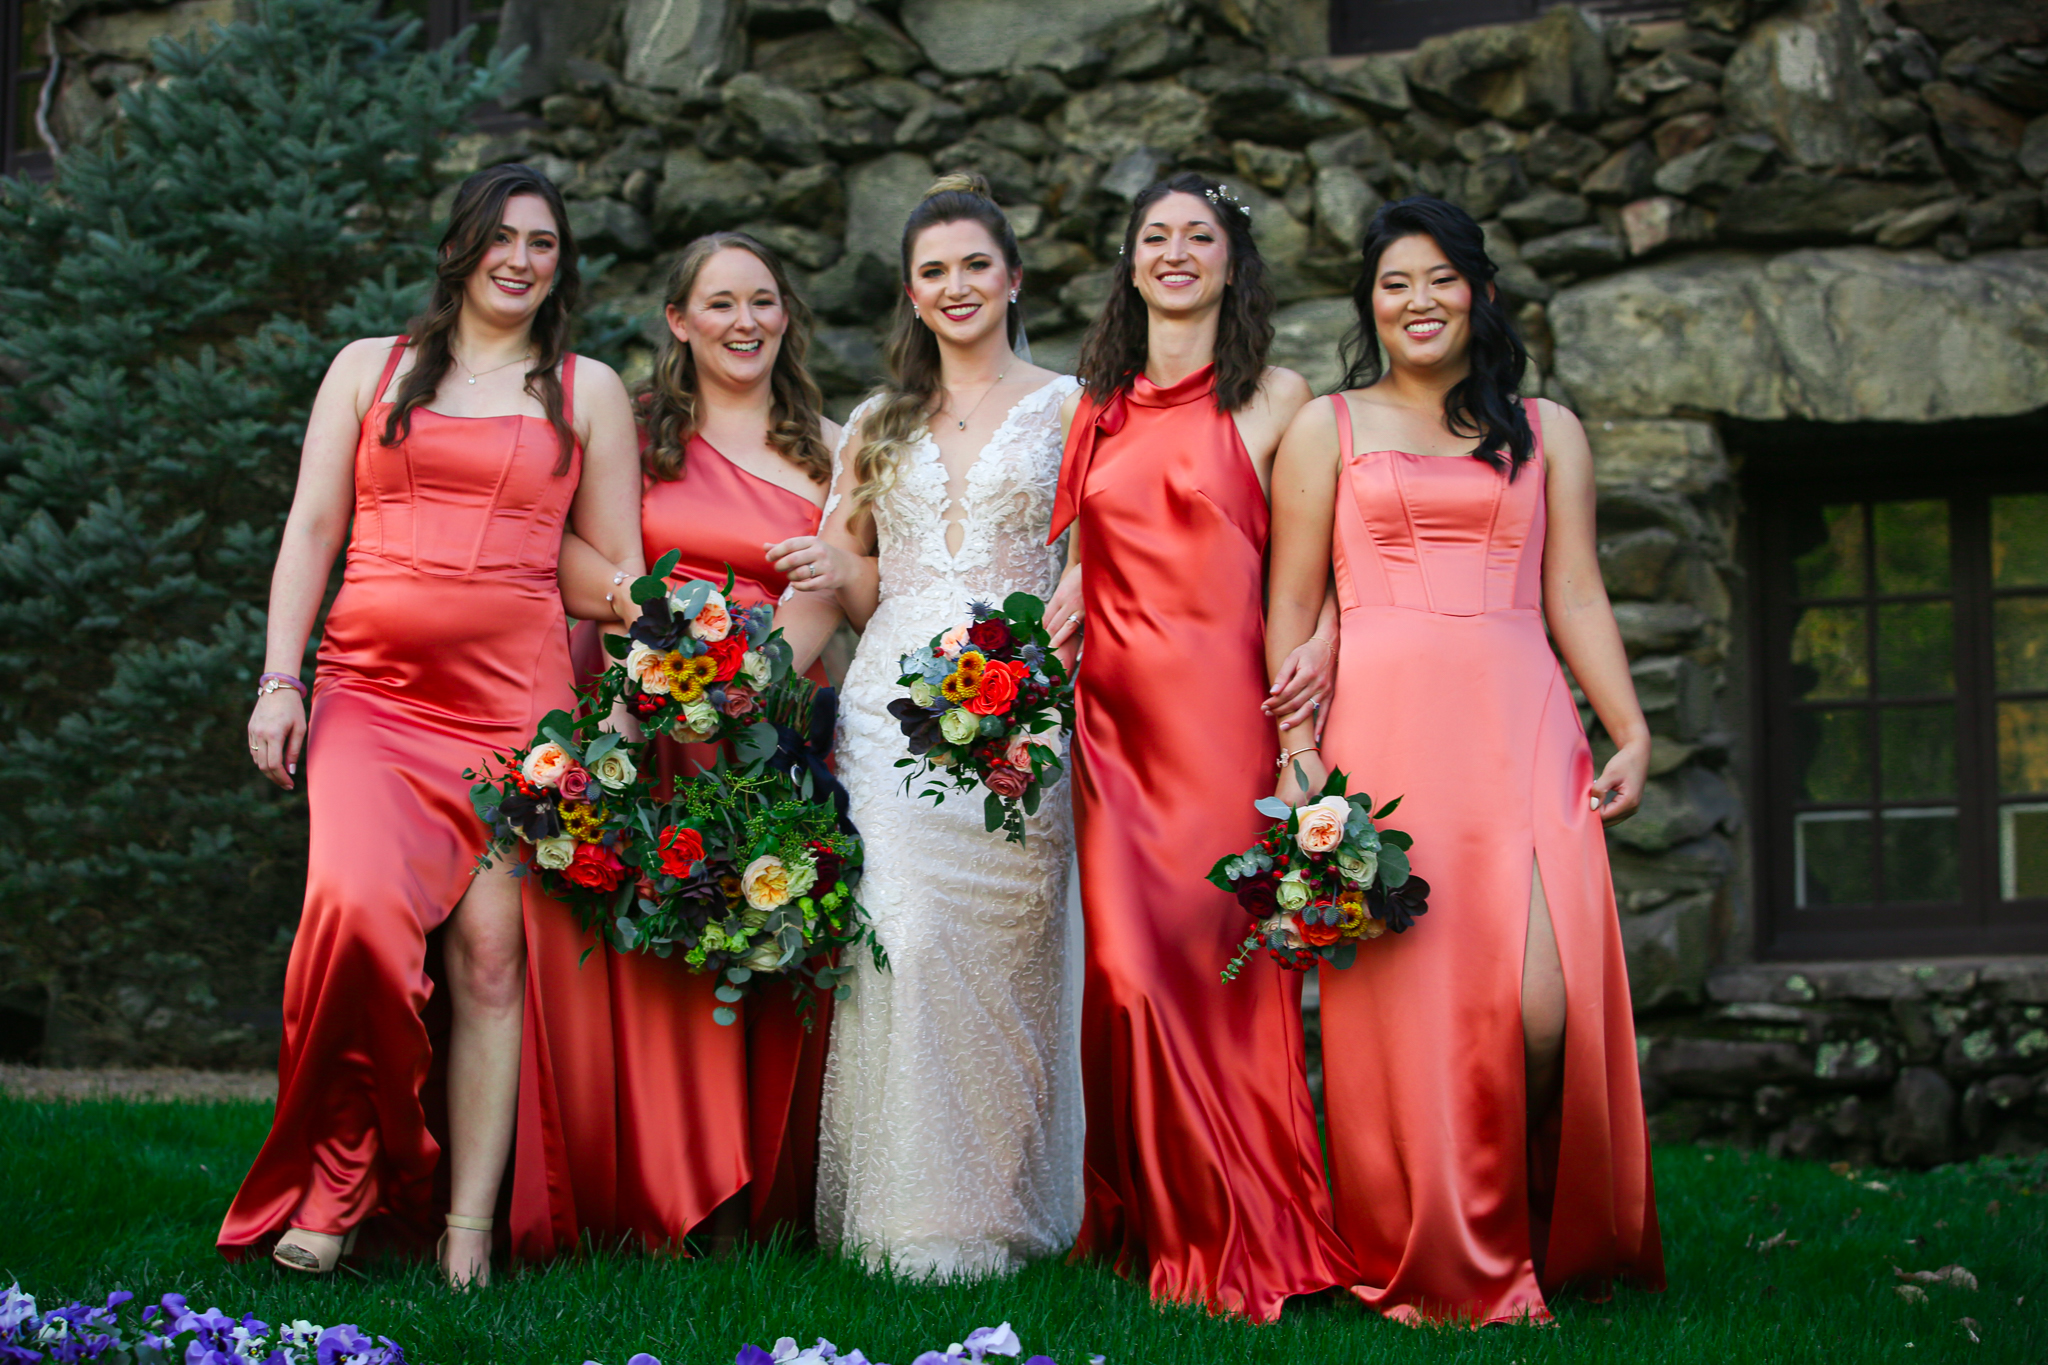 The Bridemaids look beautiful at one of Ashevilles many wedding venues, the grove park Inn.